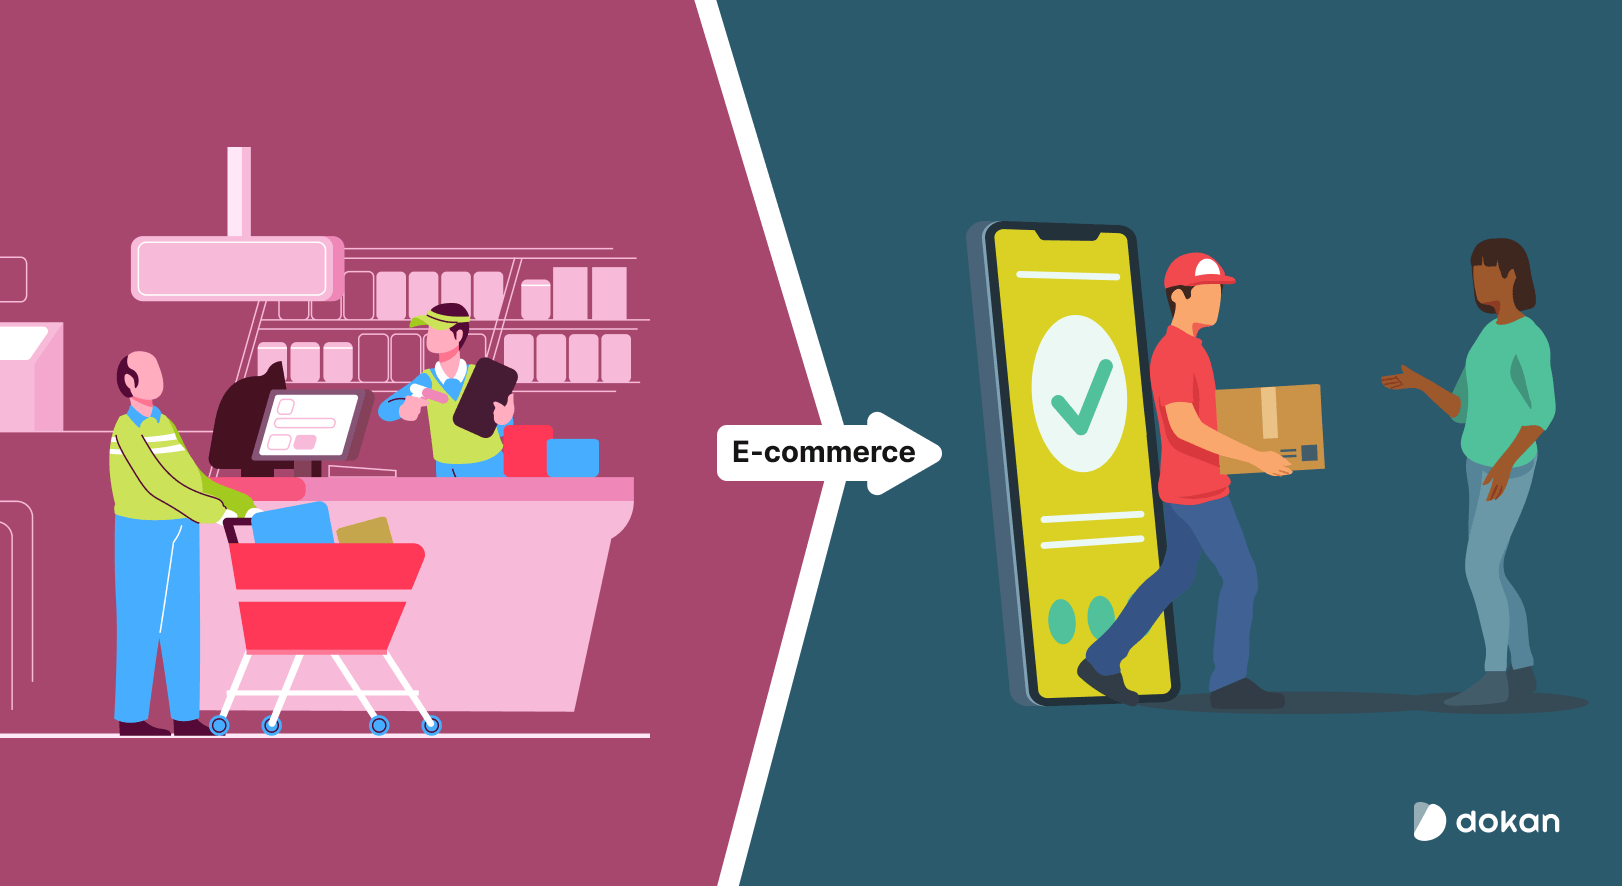 Exploring How eCommerce Has Changed Our Business Forever